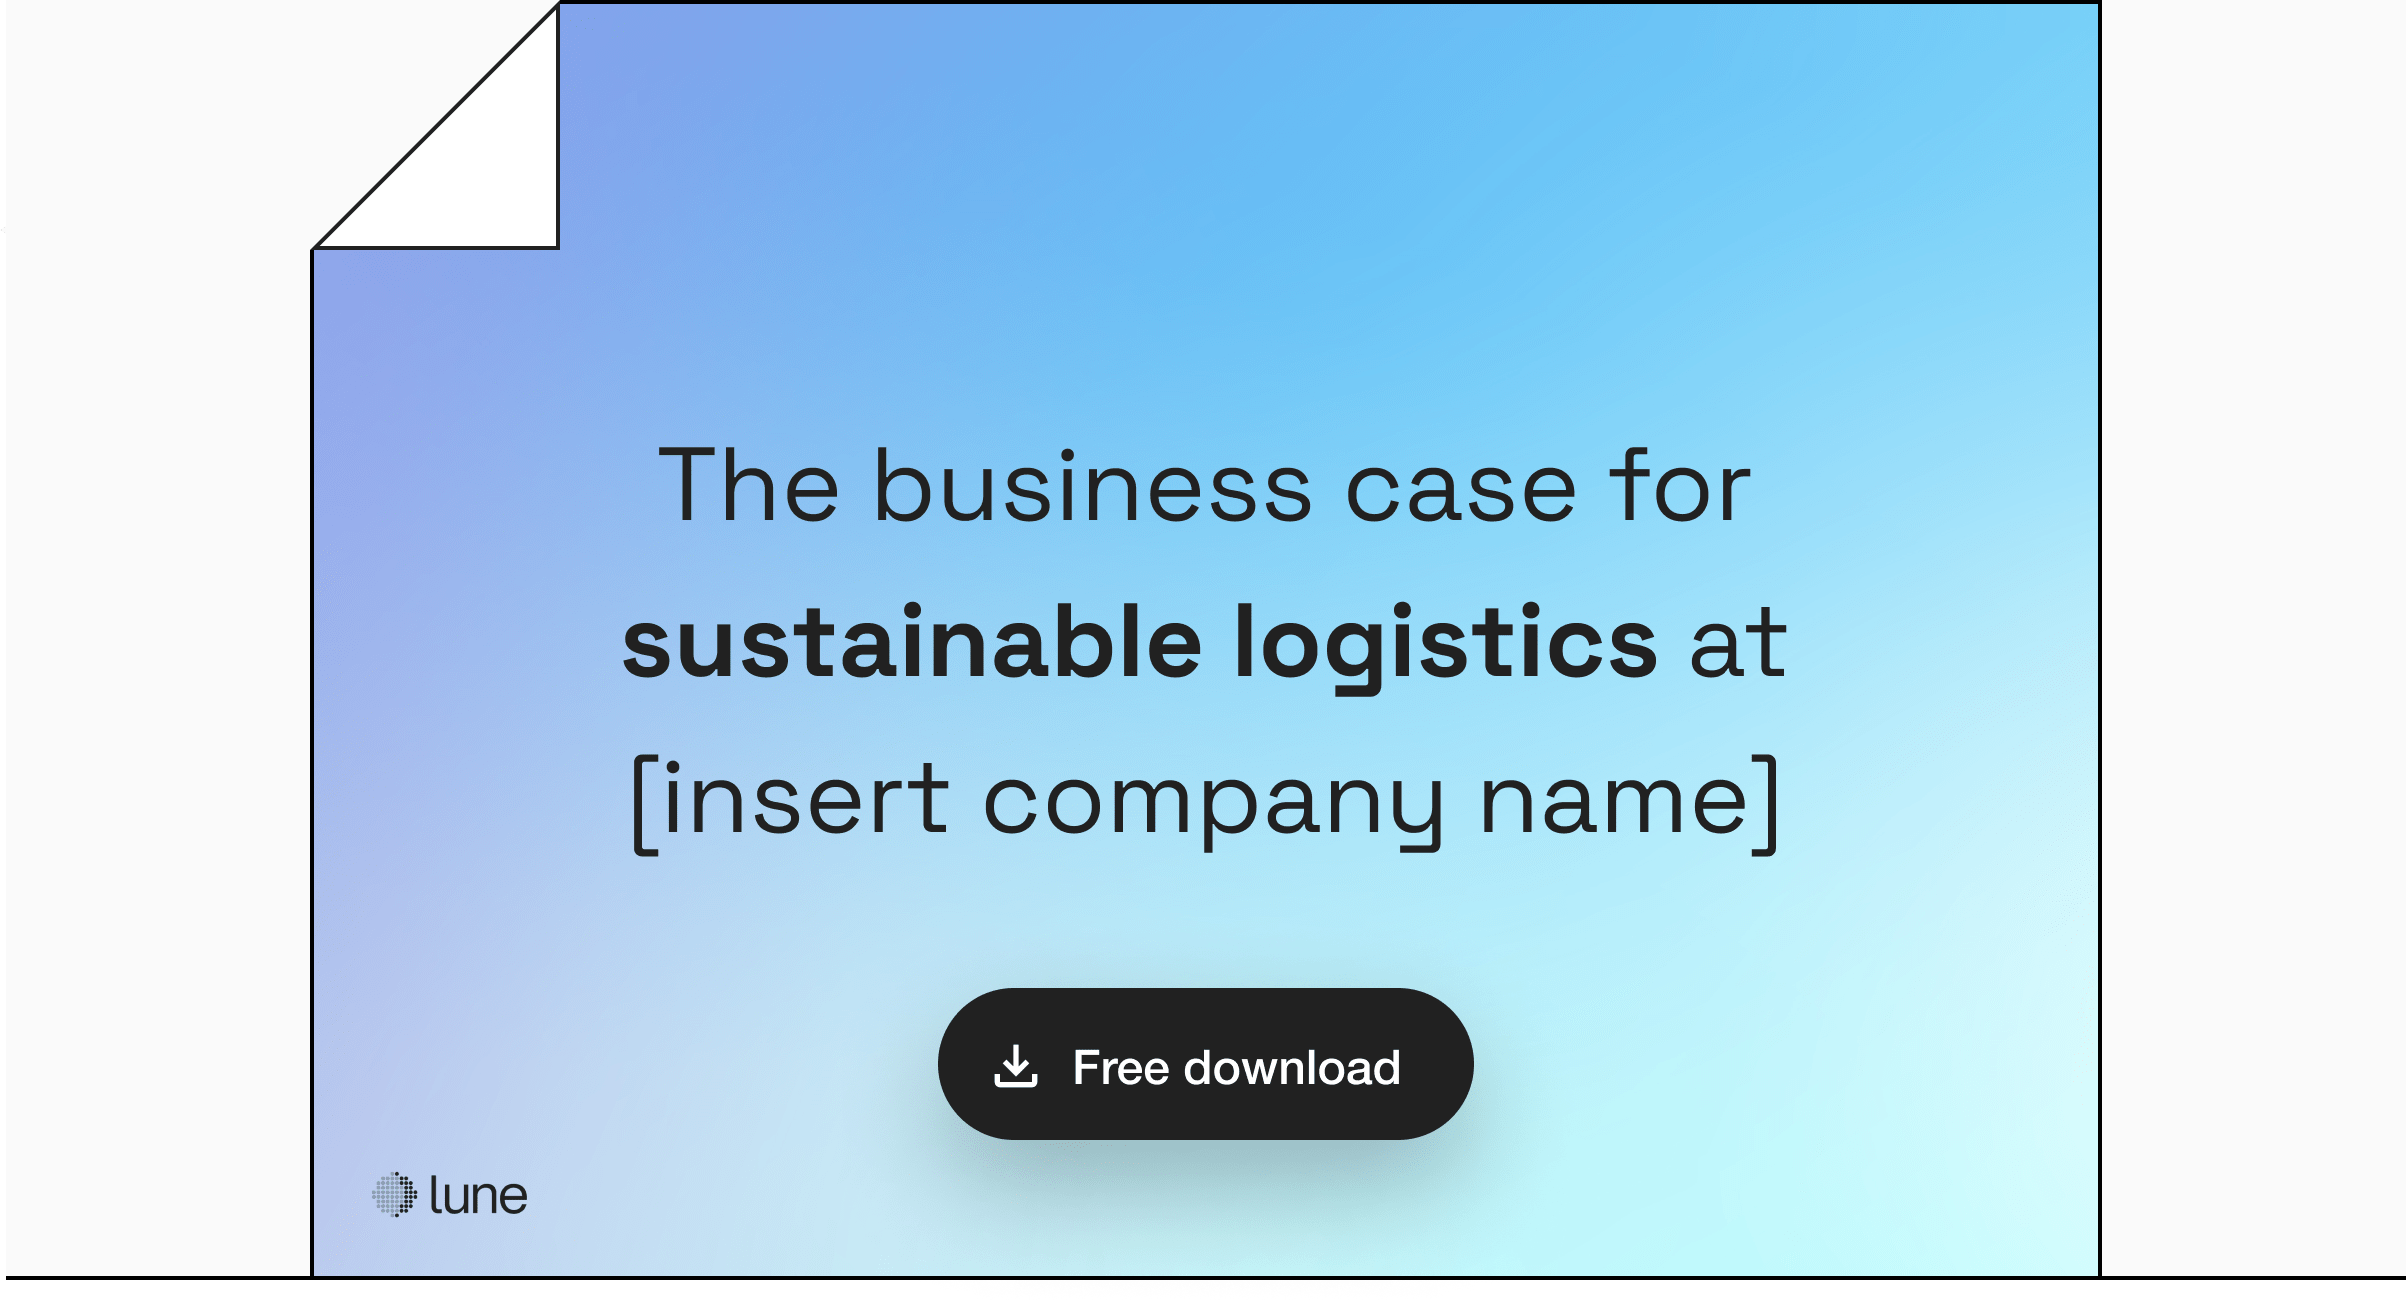 The business case for sustainable logistics at [insert company name]. Free download.